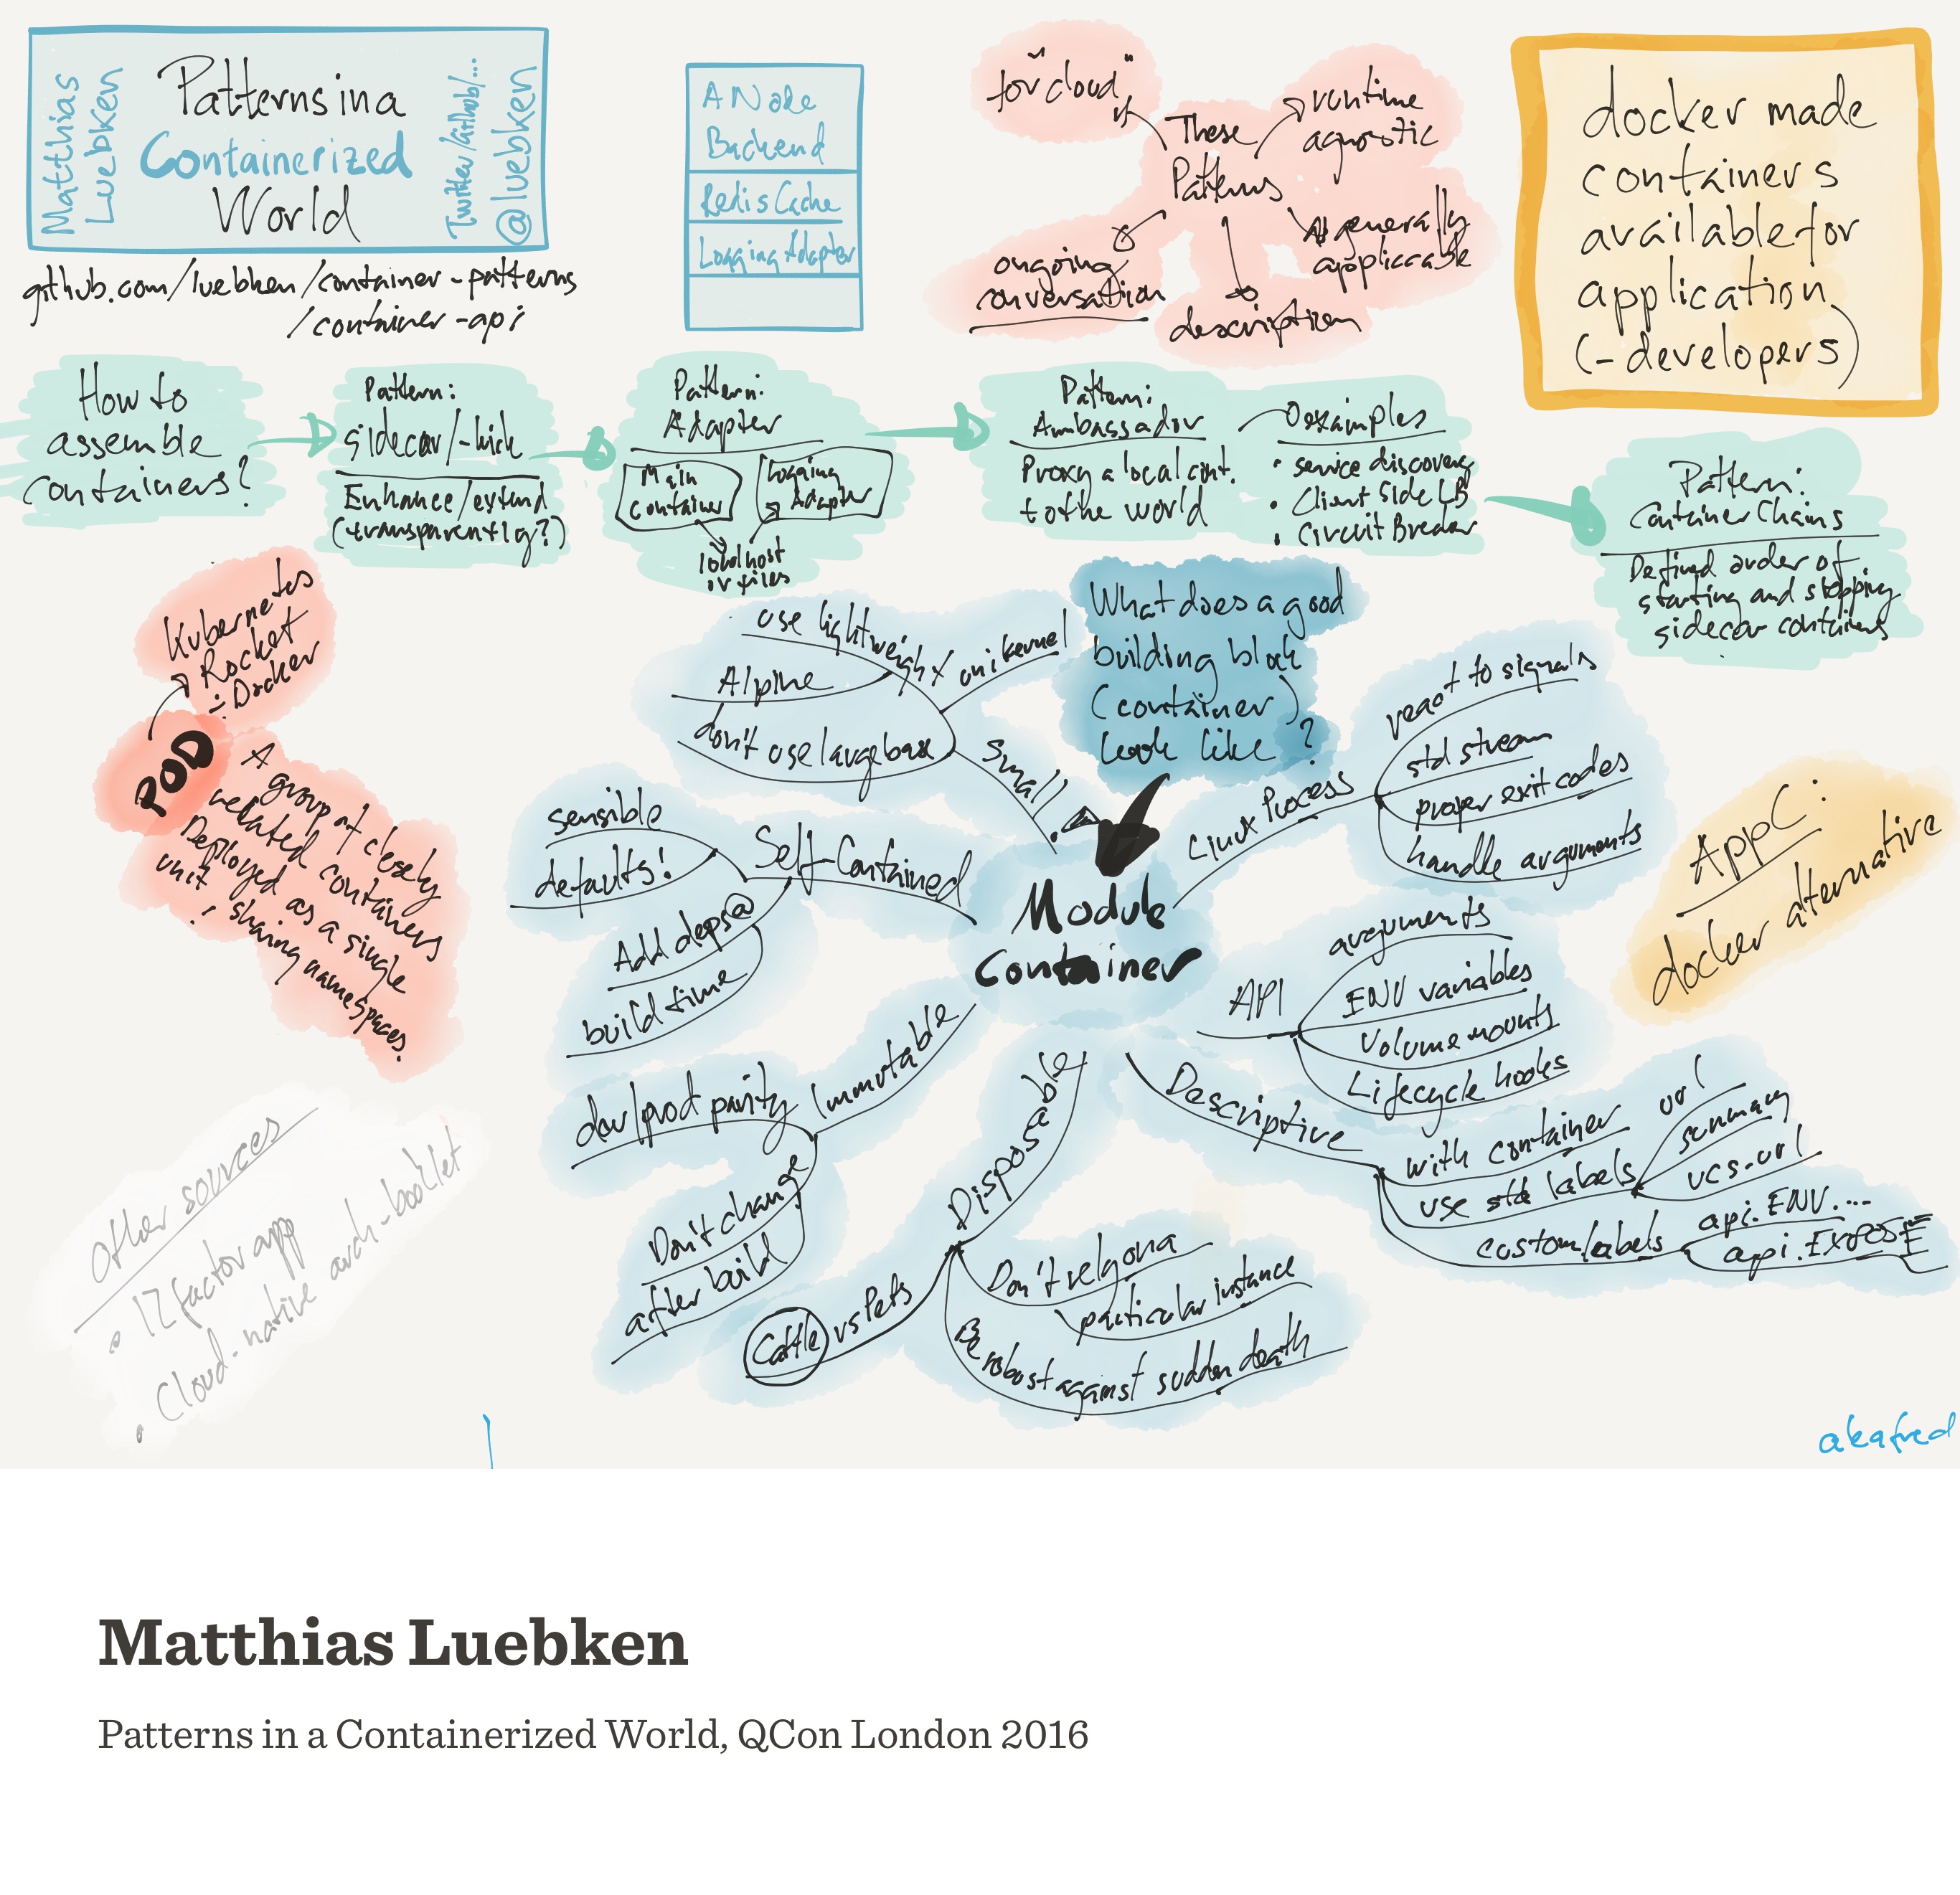 Notes from Patterns in a Containerized World (Matthias Lübken)